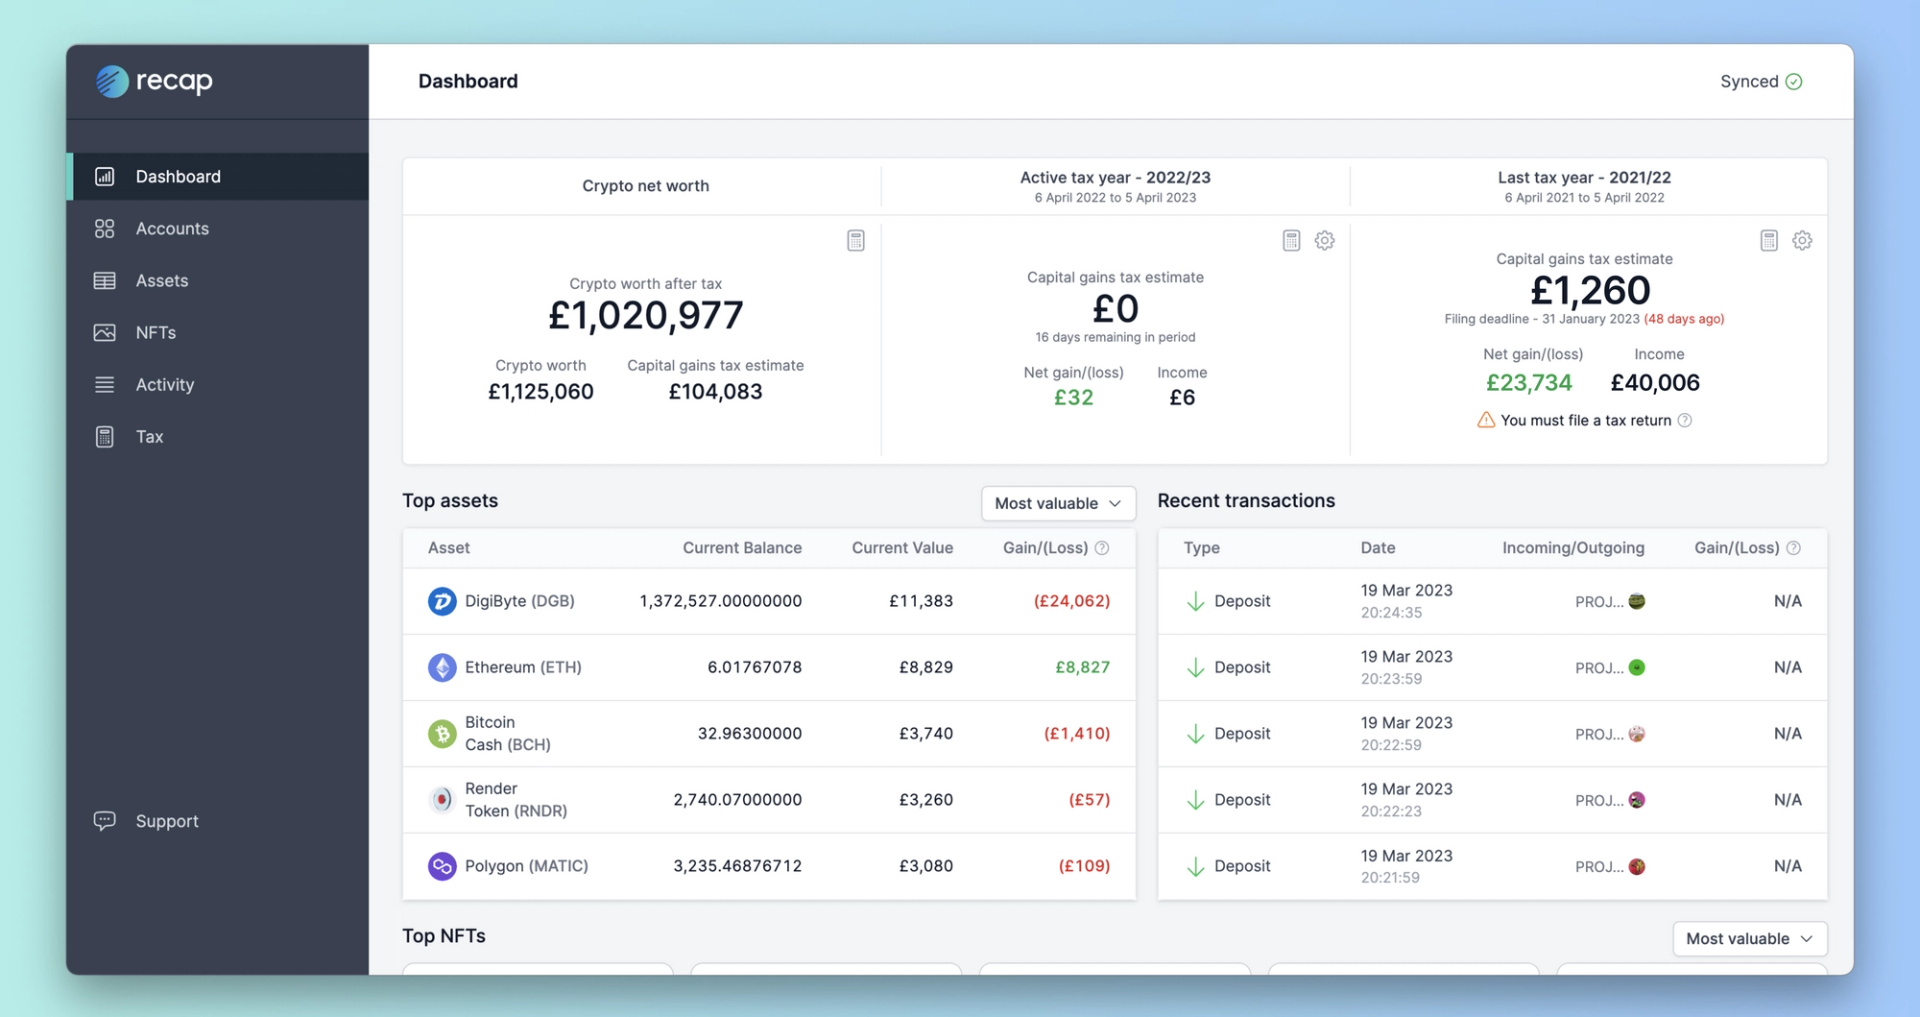 Recap's UK dashboard helps crypto investors keep track of their capital gains and identifies assets with losses optimal for tax loss harvesting